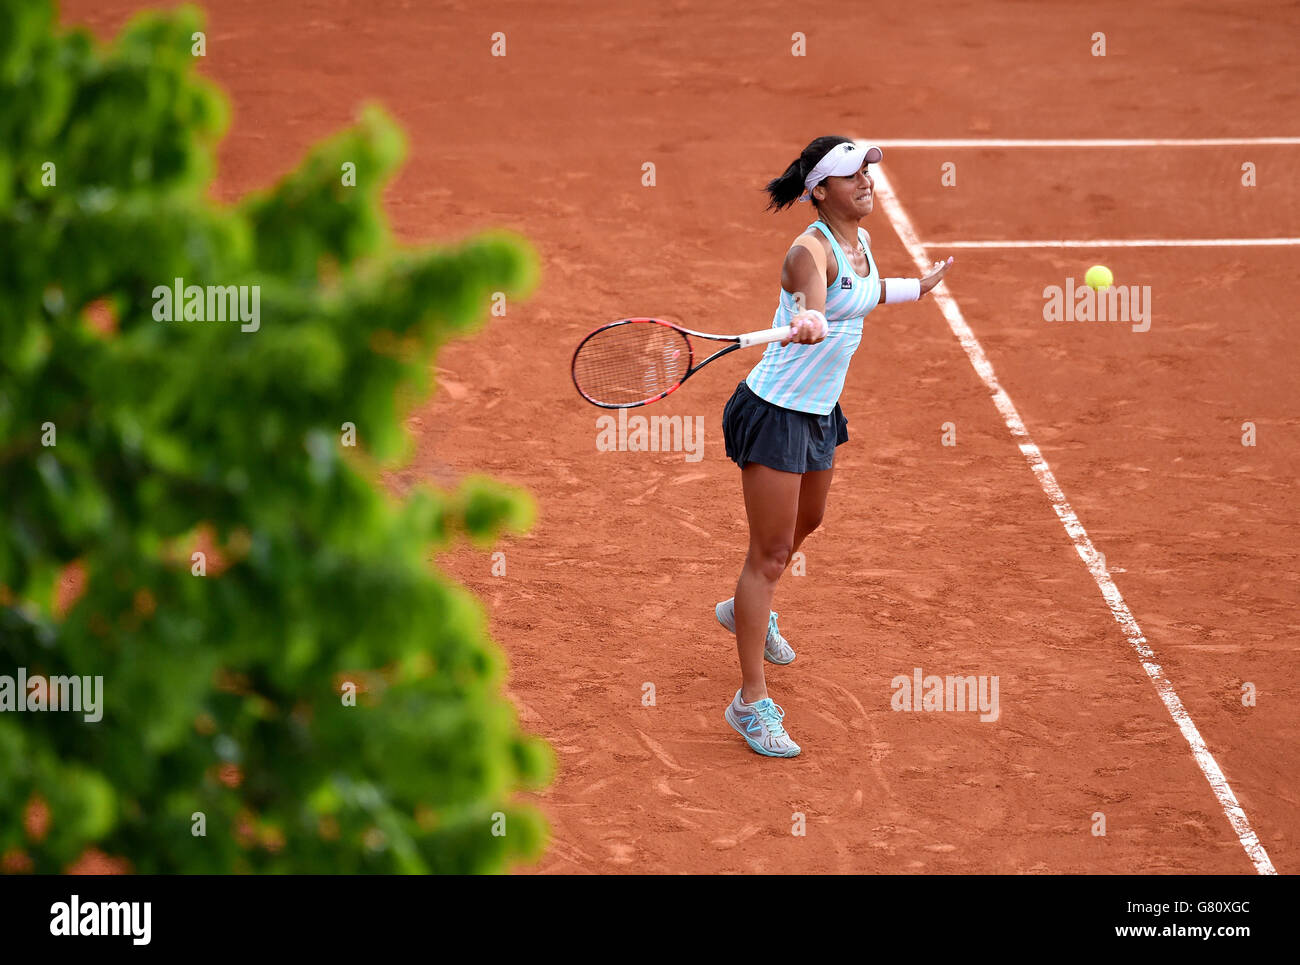 Heather Watson during her 2nd round women's singles match against Sloane Stephens on day five of the French Open at Roland Garros on May 28, 2015 in Paris, France Stock Photo